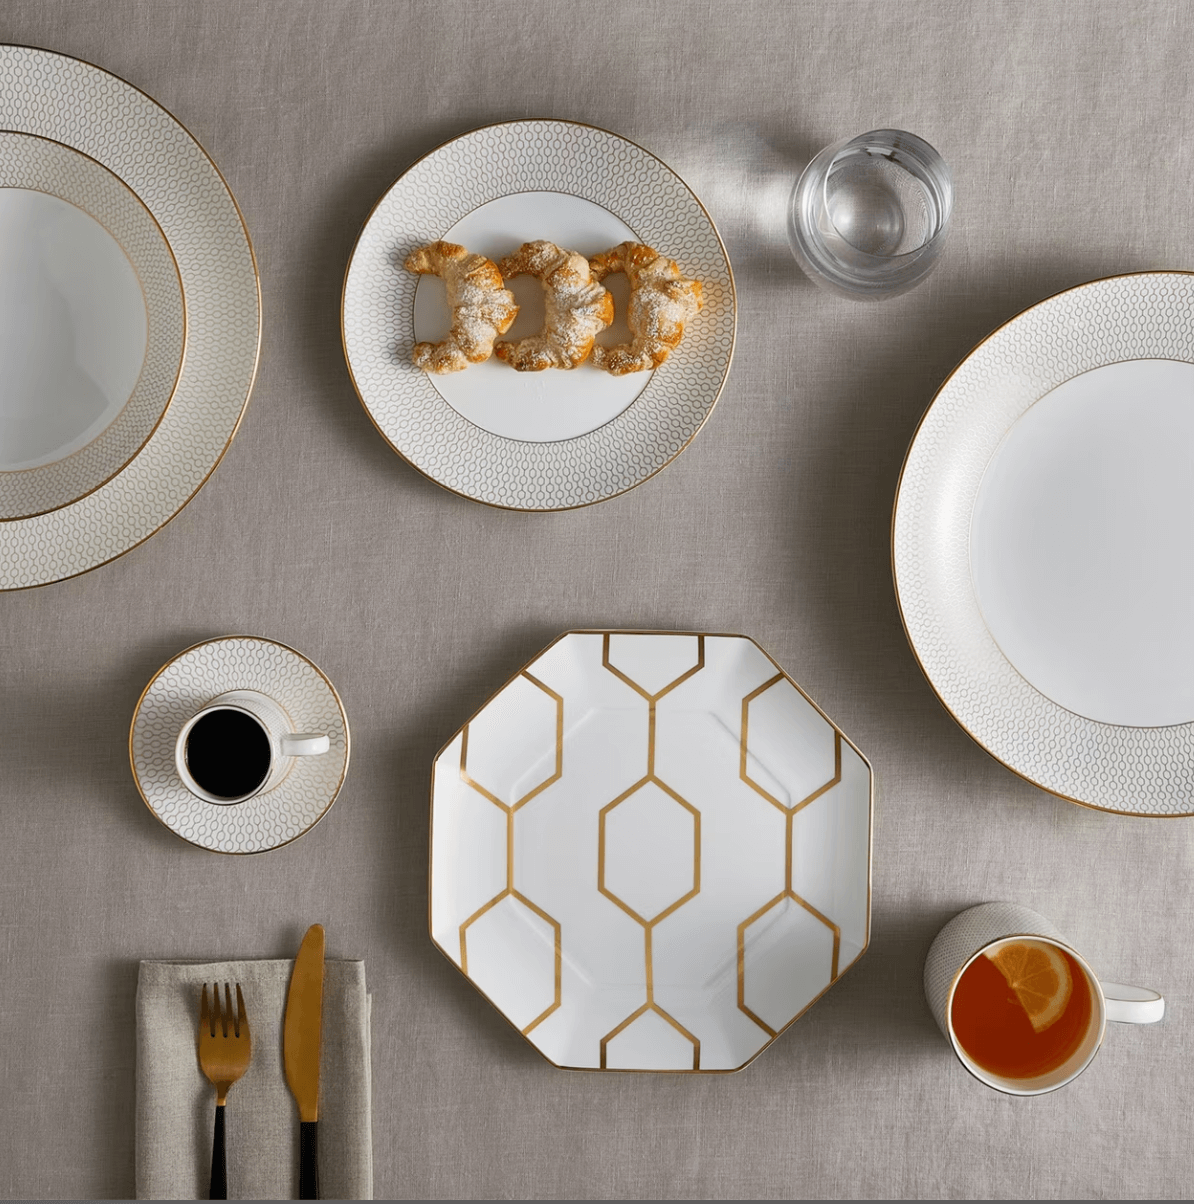 Wedgwood Gio Gold Place Setting Patterns